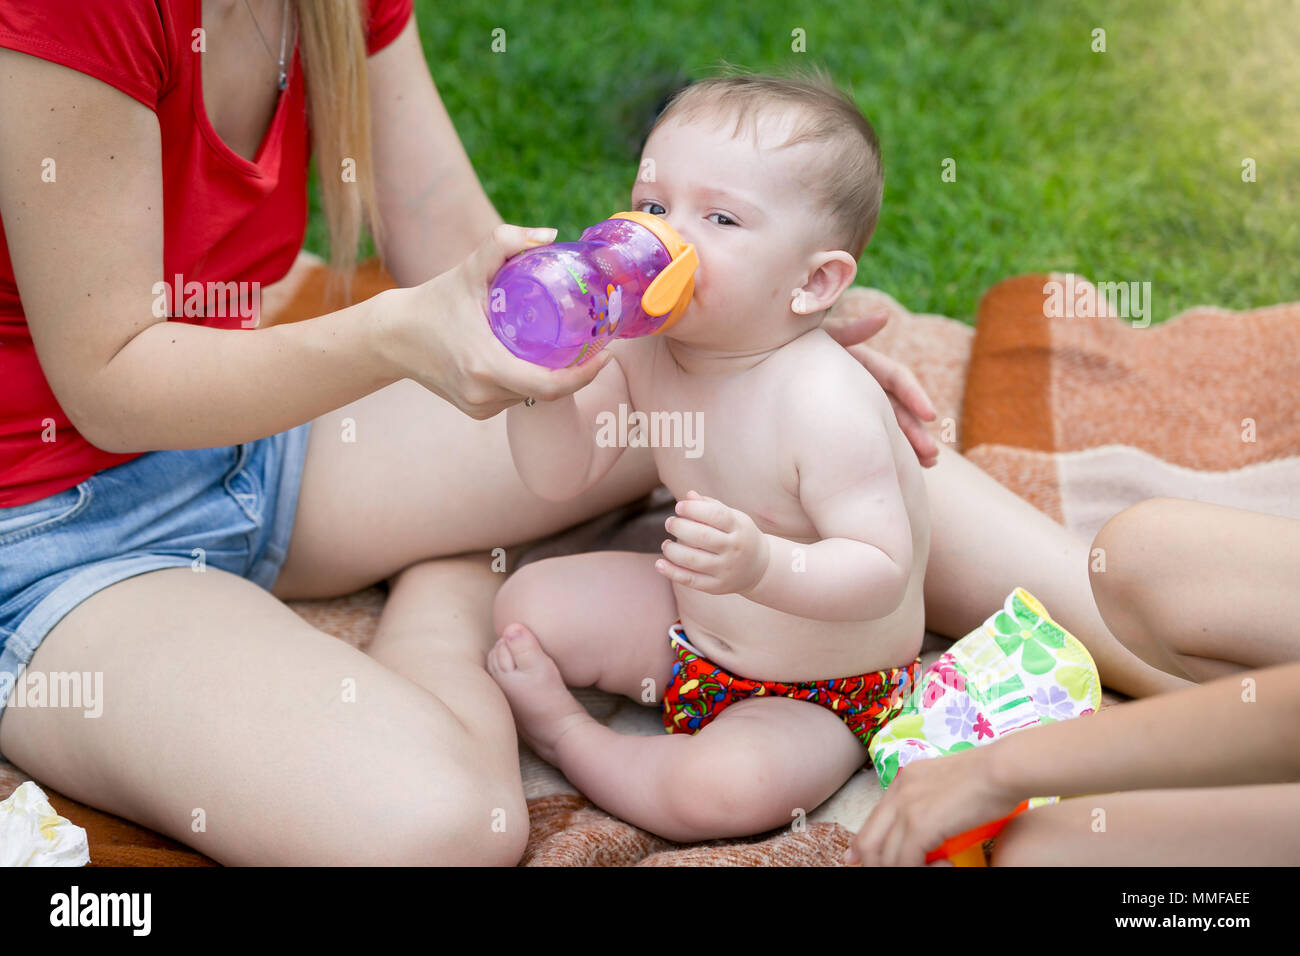 Cute baby boy sitting on blanket on family picnic and drinking juice from bottle Stock Photo